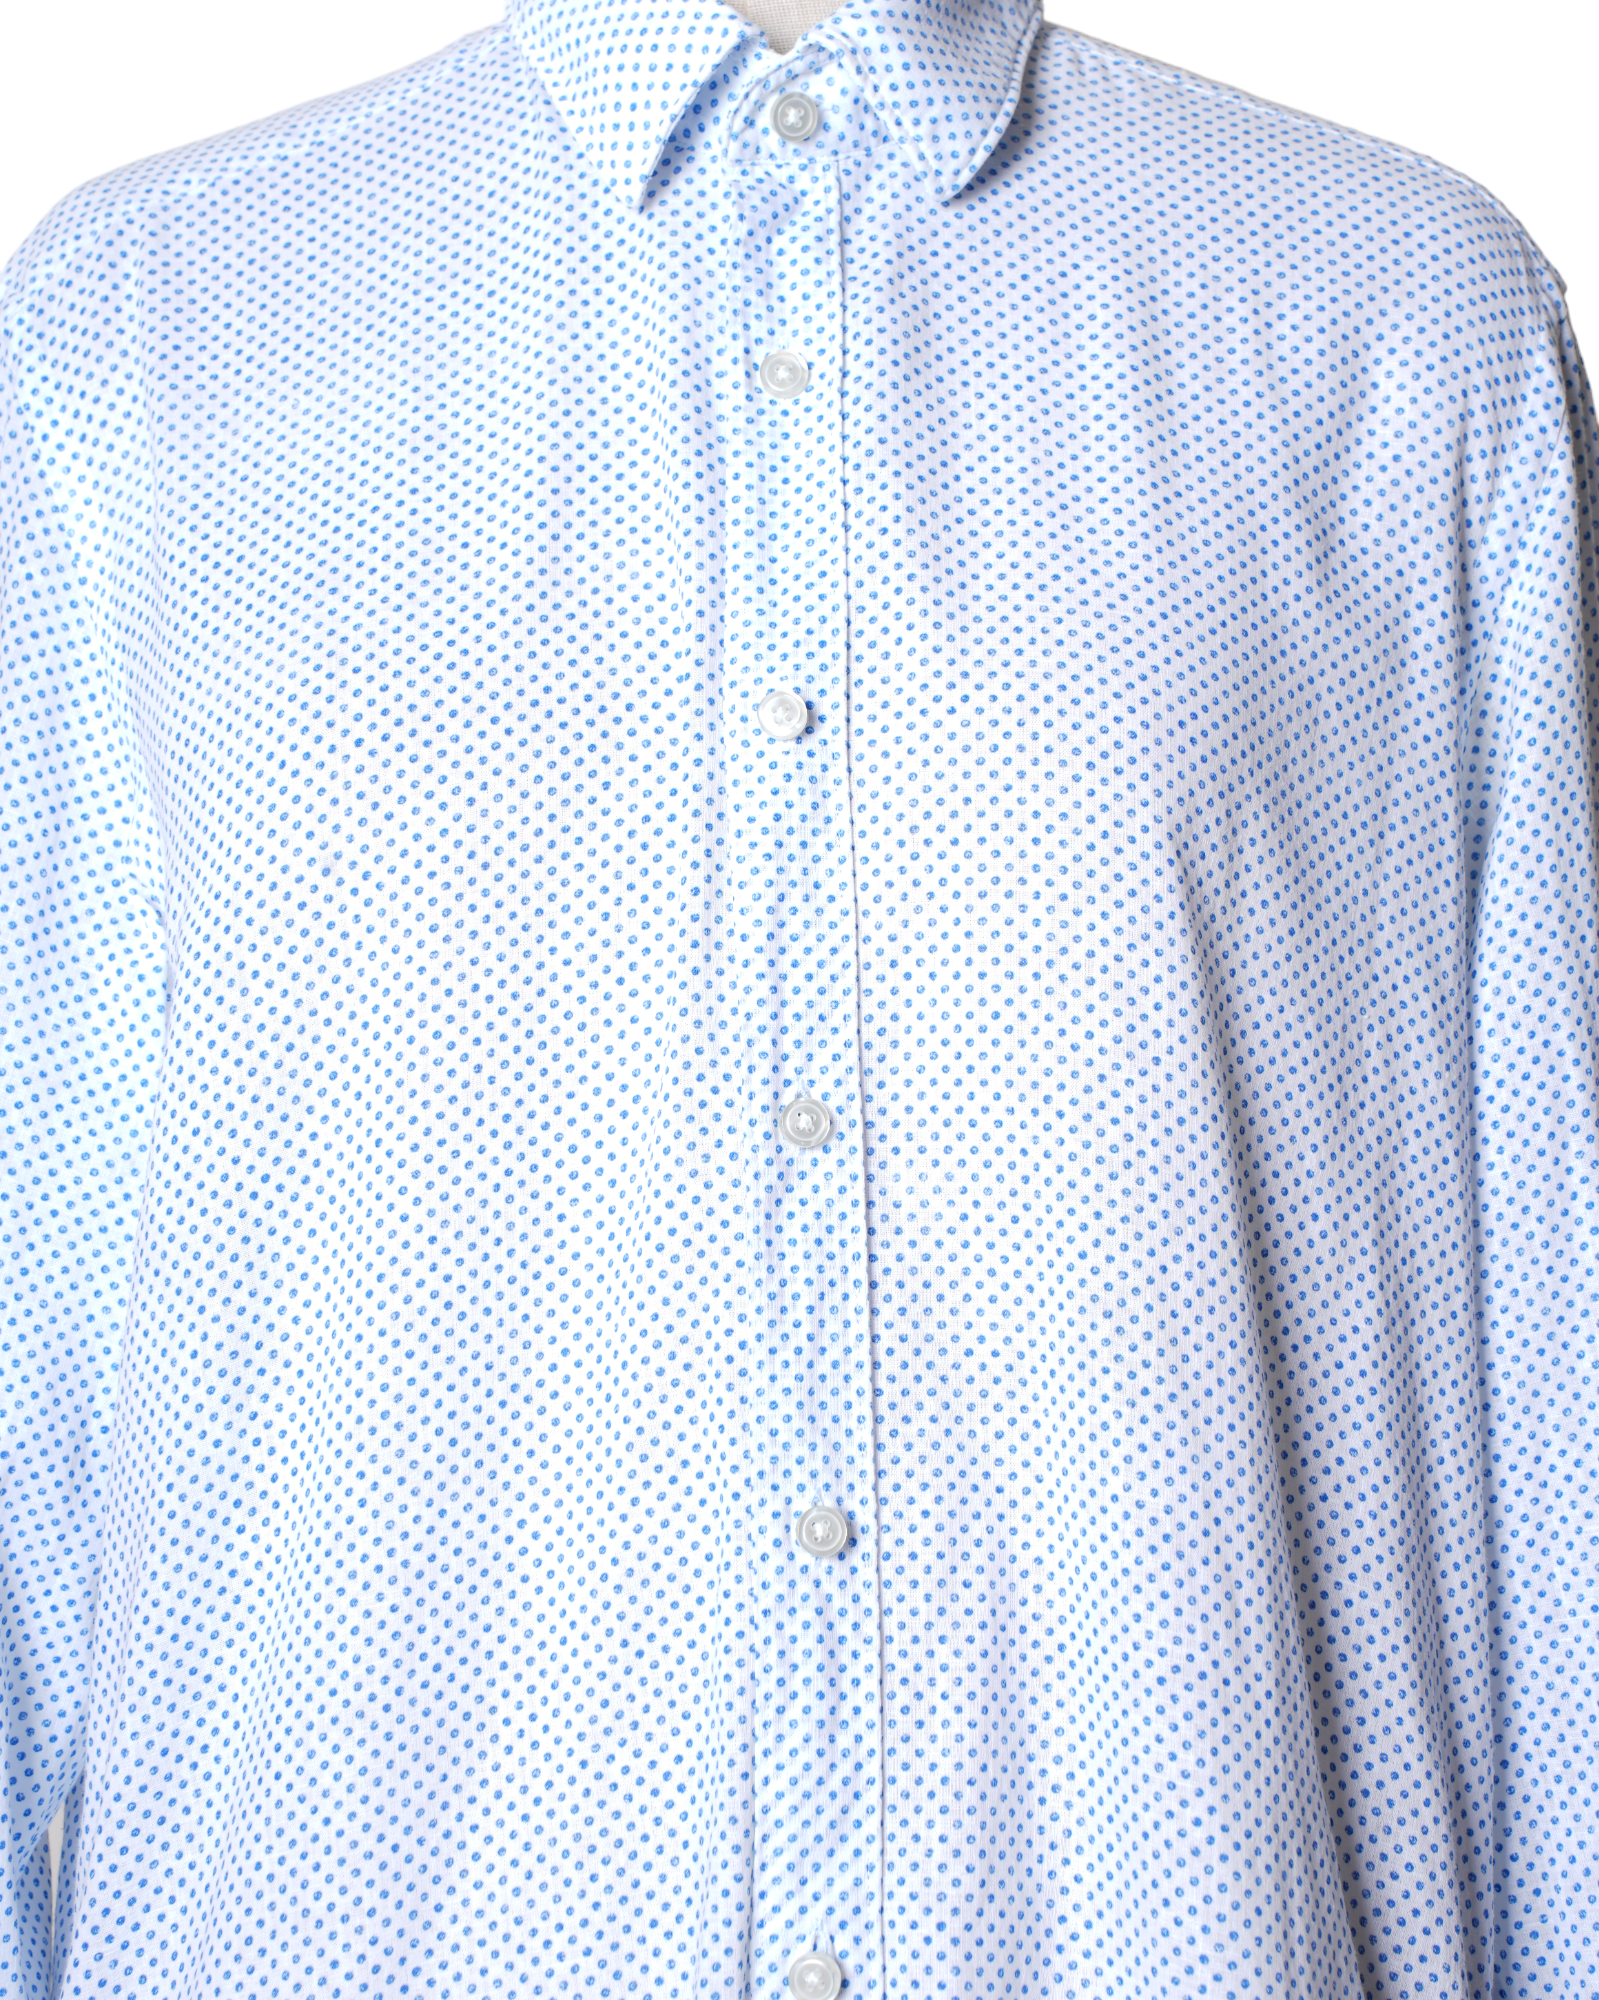 Boss White Shirt With Blue Polka Dots